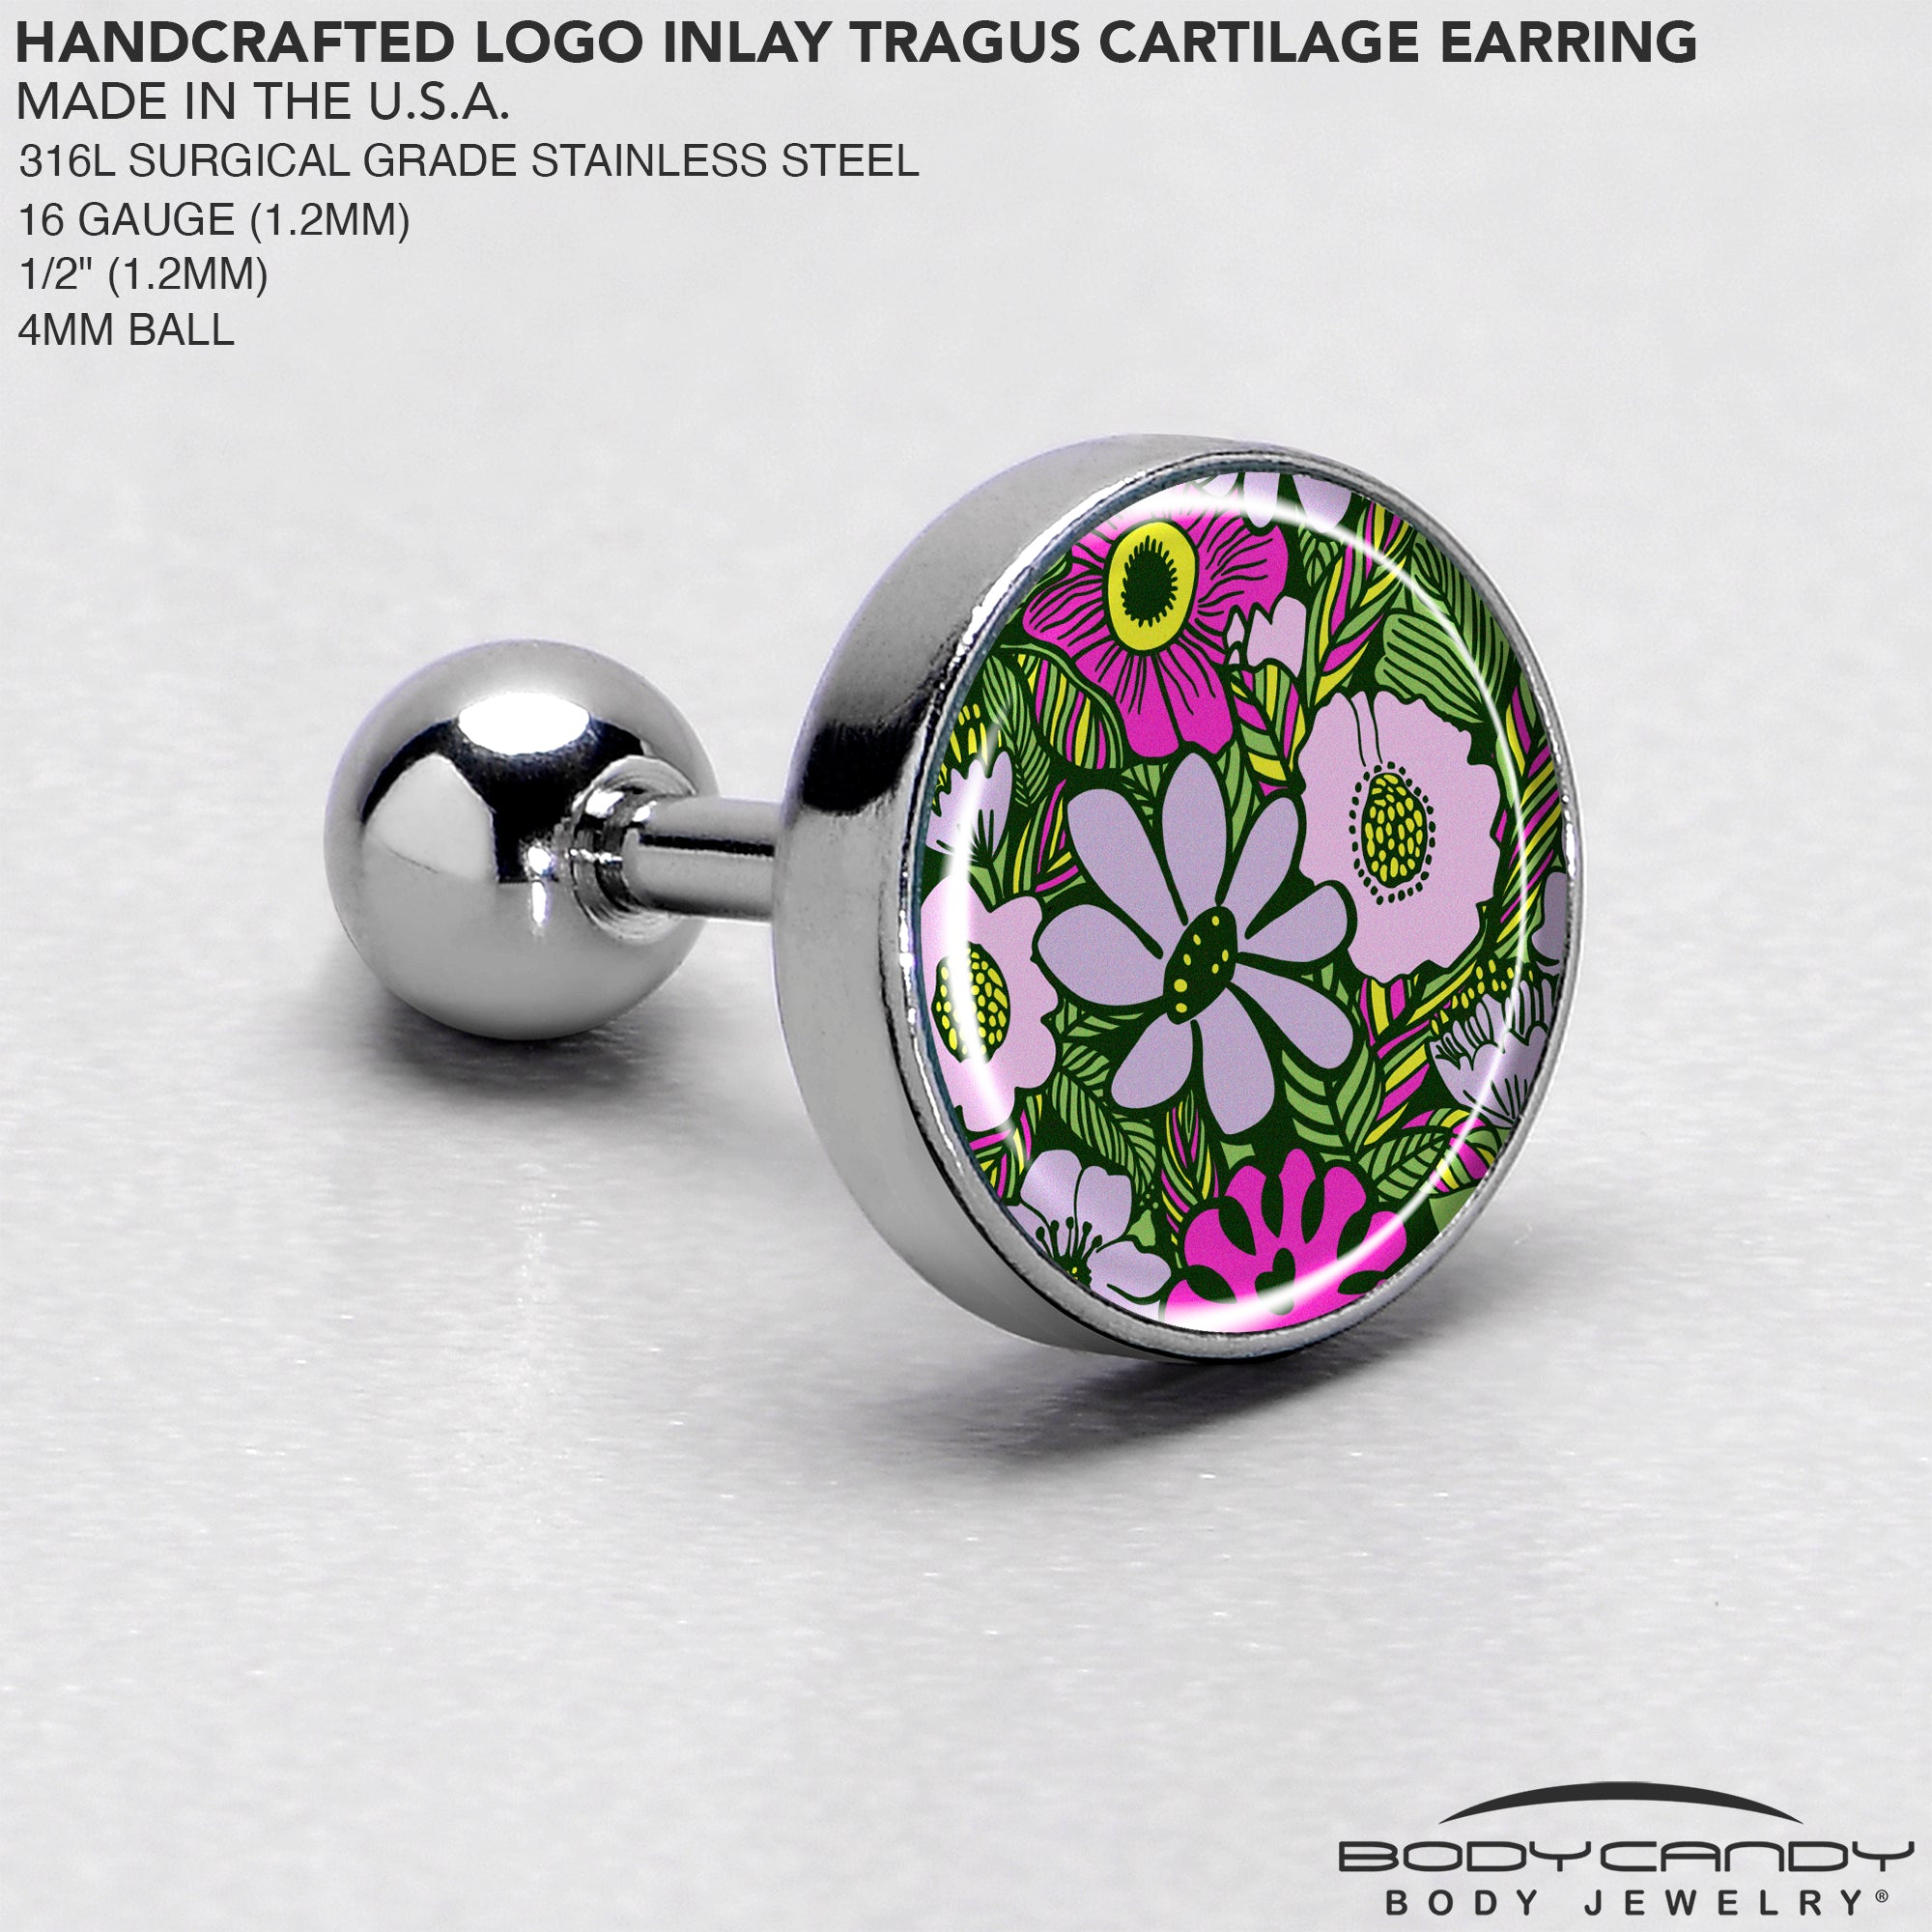 16 Gauge 1/4 Blossom Creation Paradise of Pink Flowers Cartilage Earring